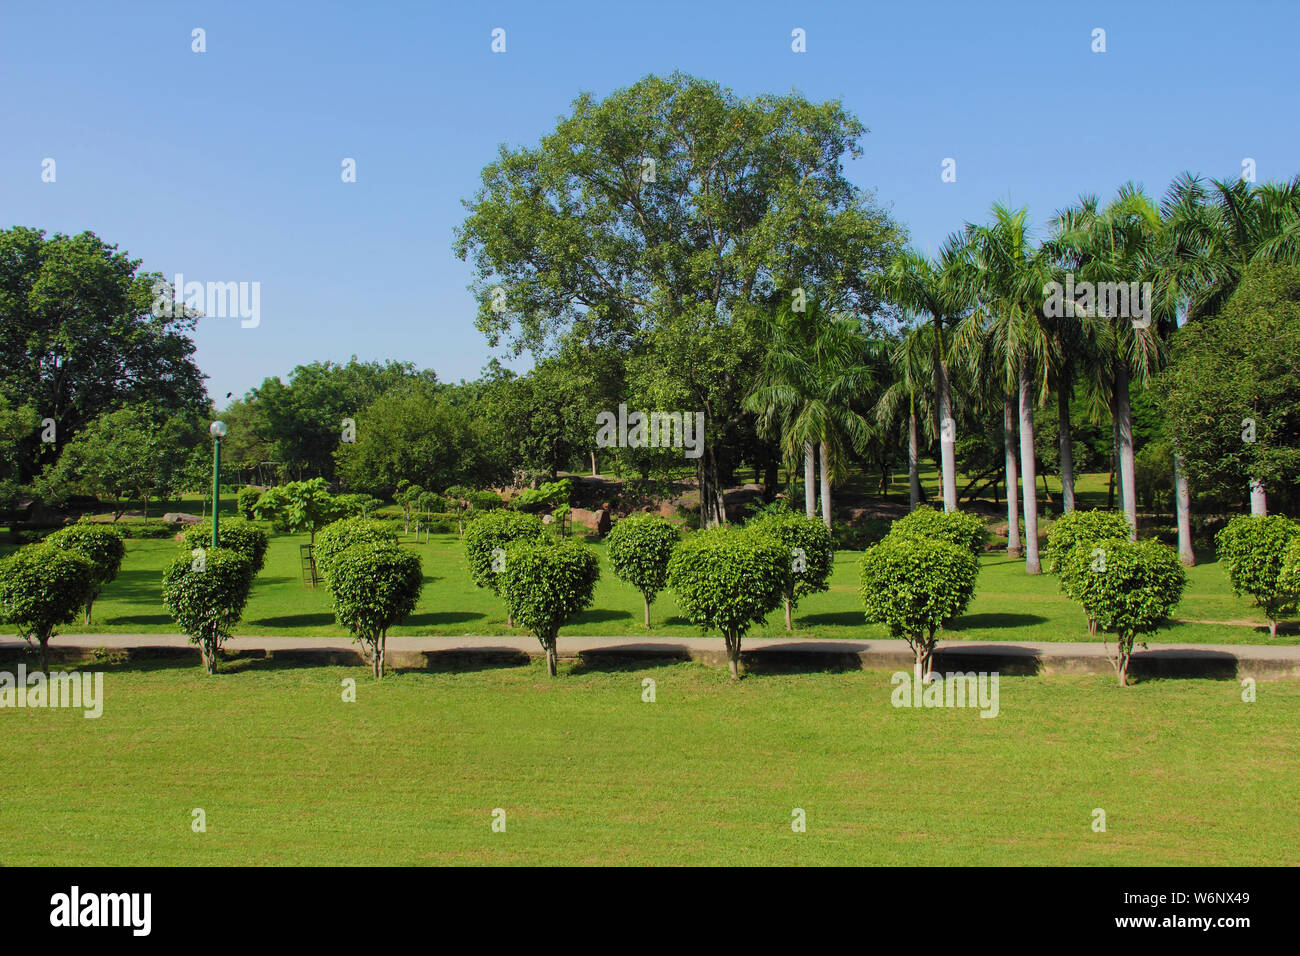 Trees in a park, India Stock Photo - Alamy